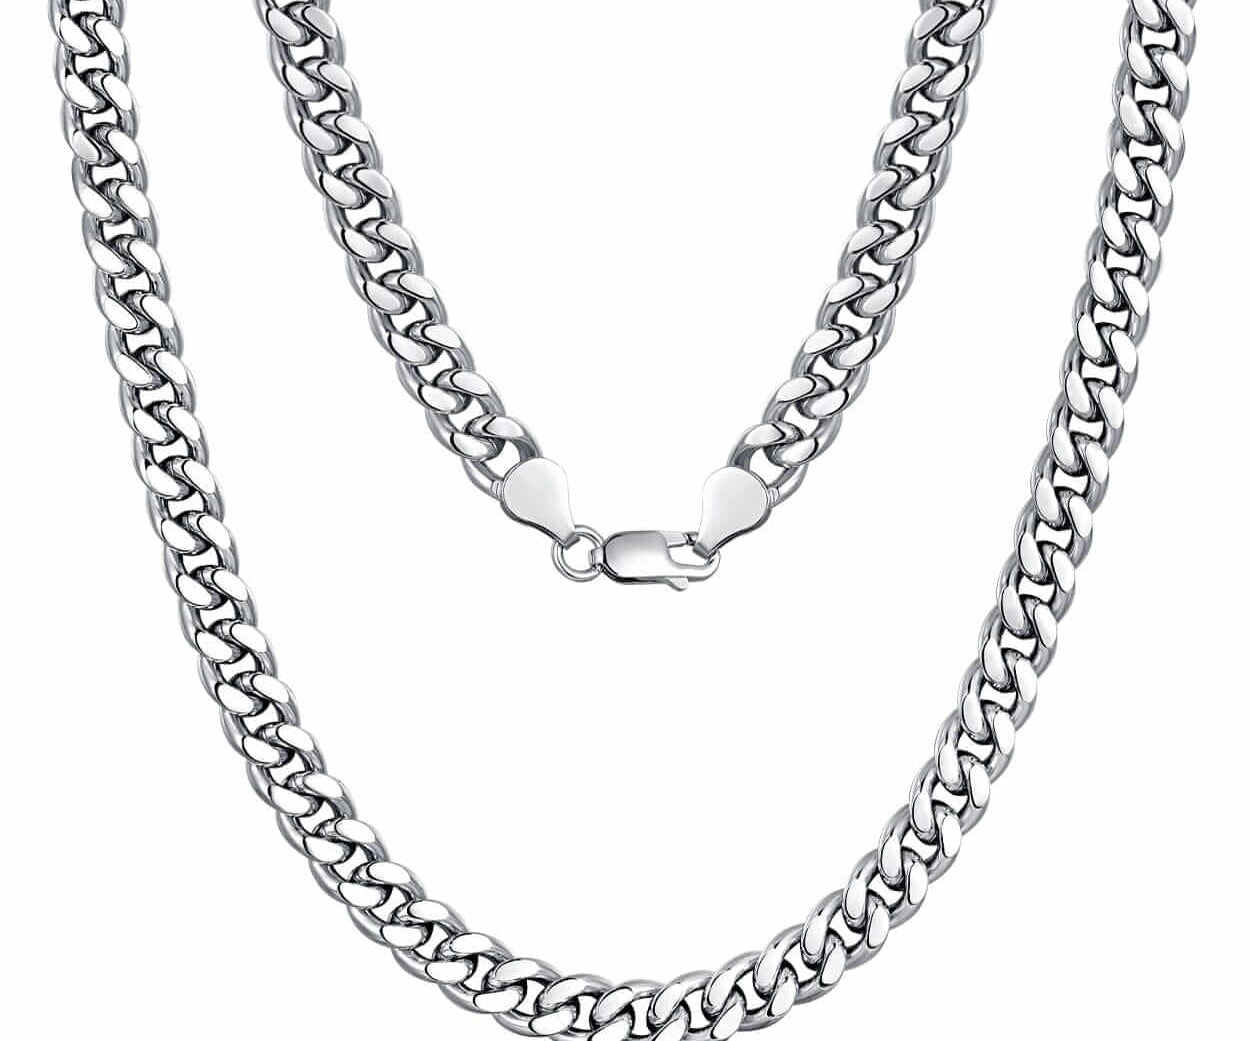 Cuban Link Statement Chain 7mmHandcrafted Fine Jewelry